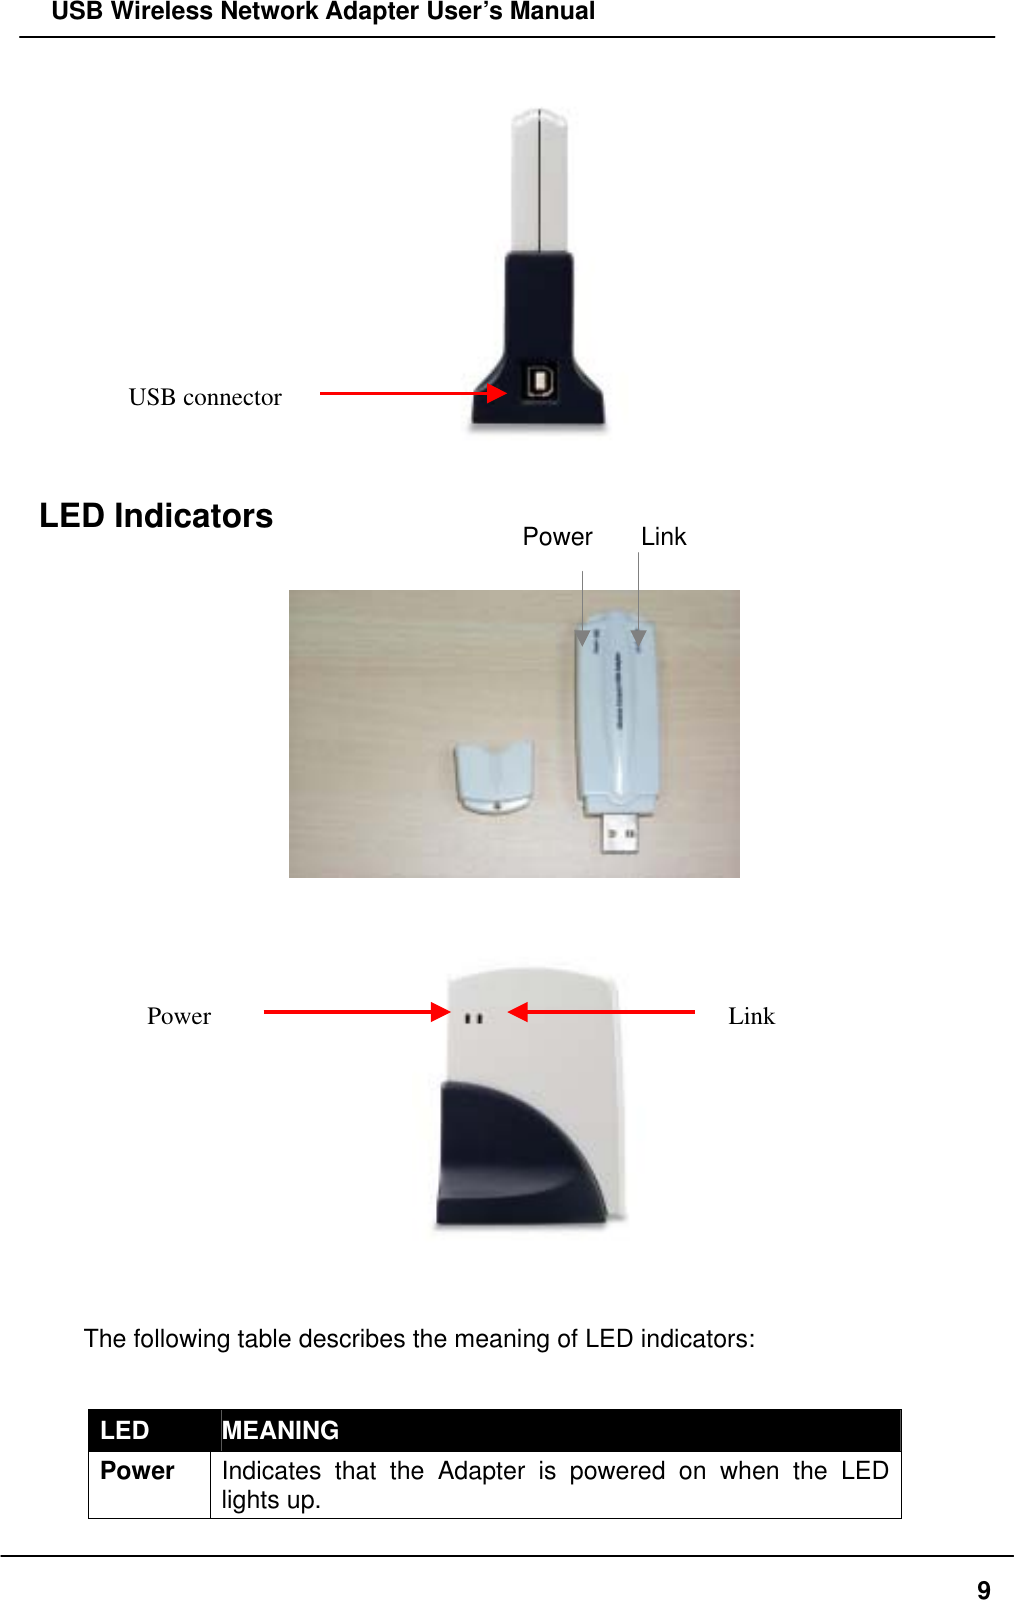   USB Wireless Network Adapter User’s Manual  USB connector  LED Indicators                                         Power  Link   Power  Link  The following table describes the meaning of LED indicators:  LED  MEANING Power  Indicates that the Adapter is powered on when the LED lights up.  9